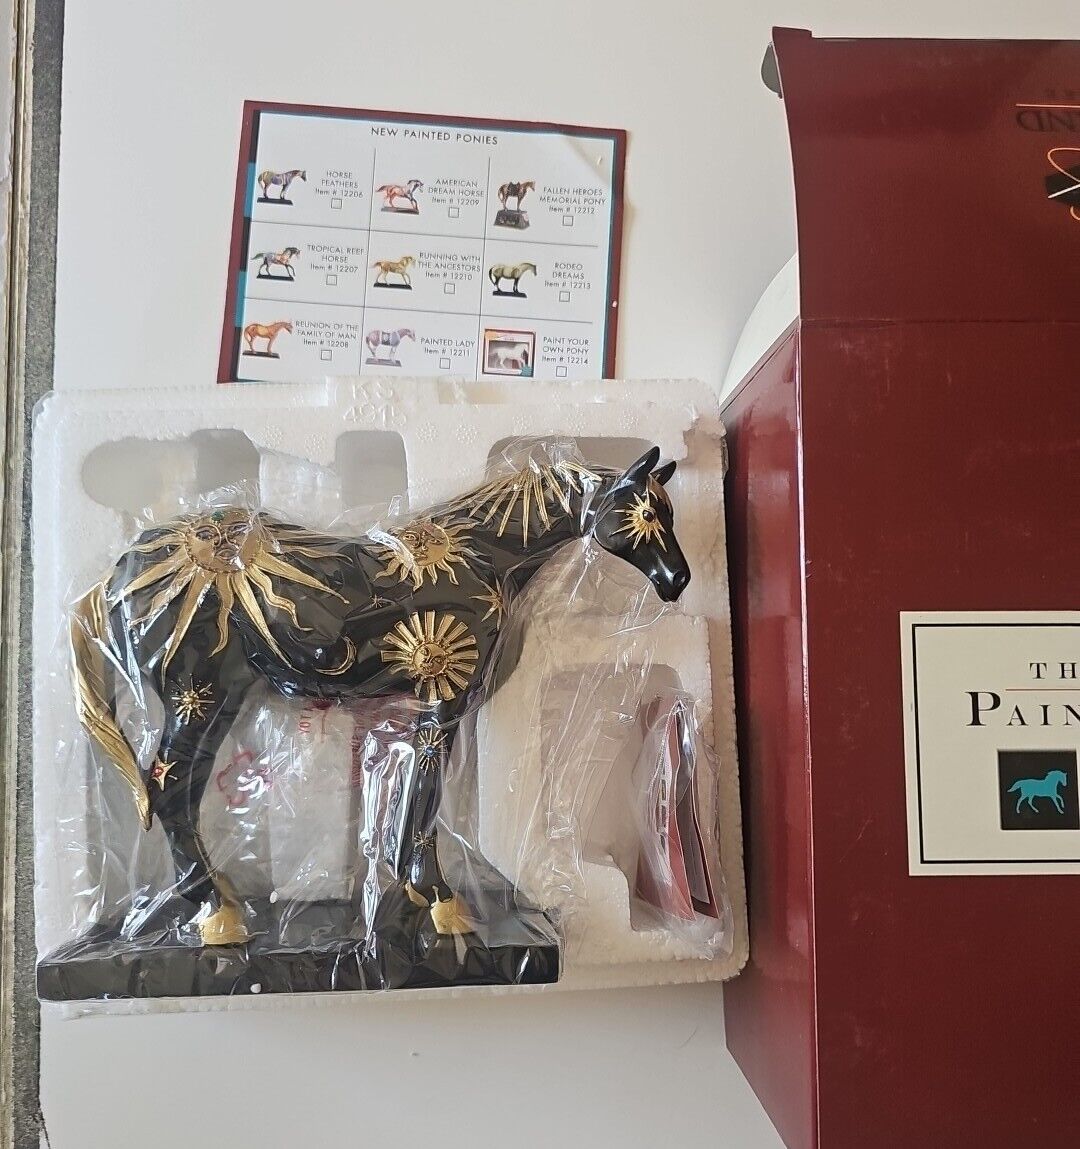 The Trail of Painted Ponies Sky of Enchantment No. 1543 2004 Horse Statue